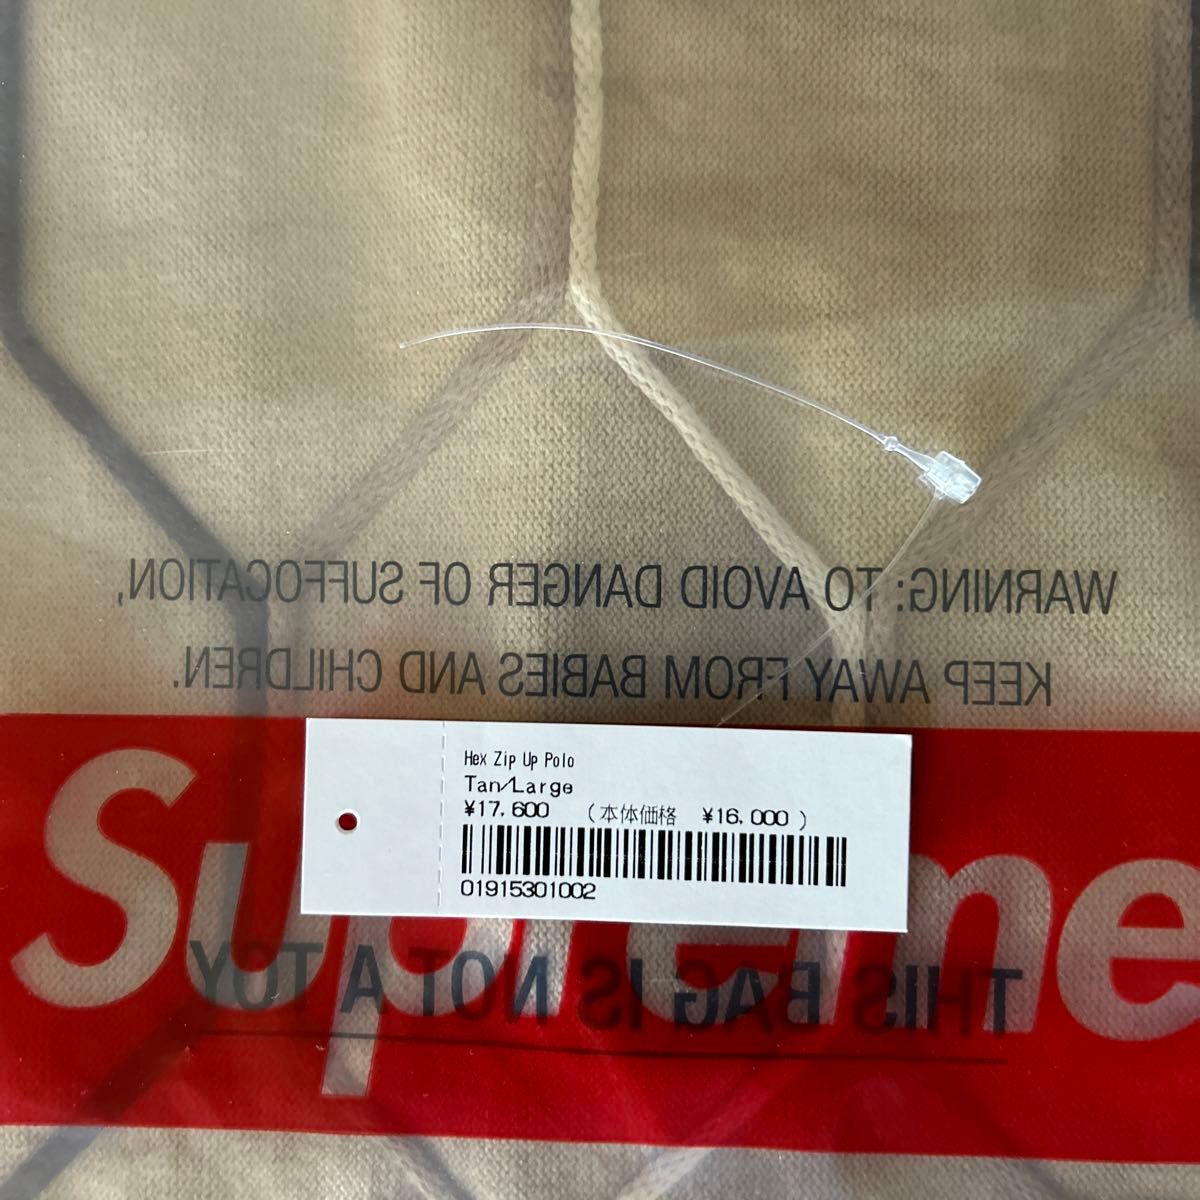 Supreme hex zip up polo